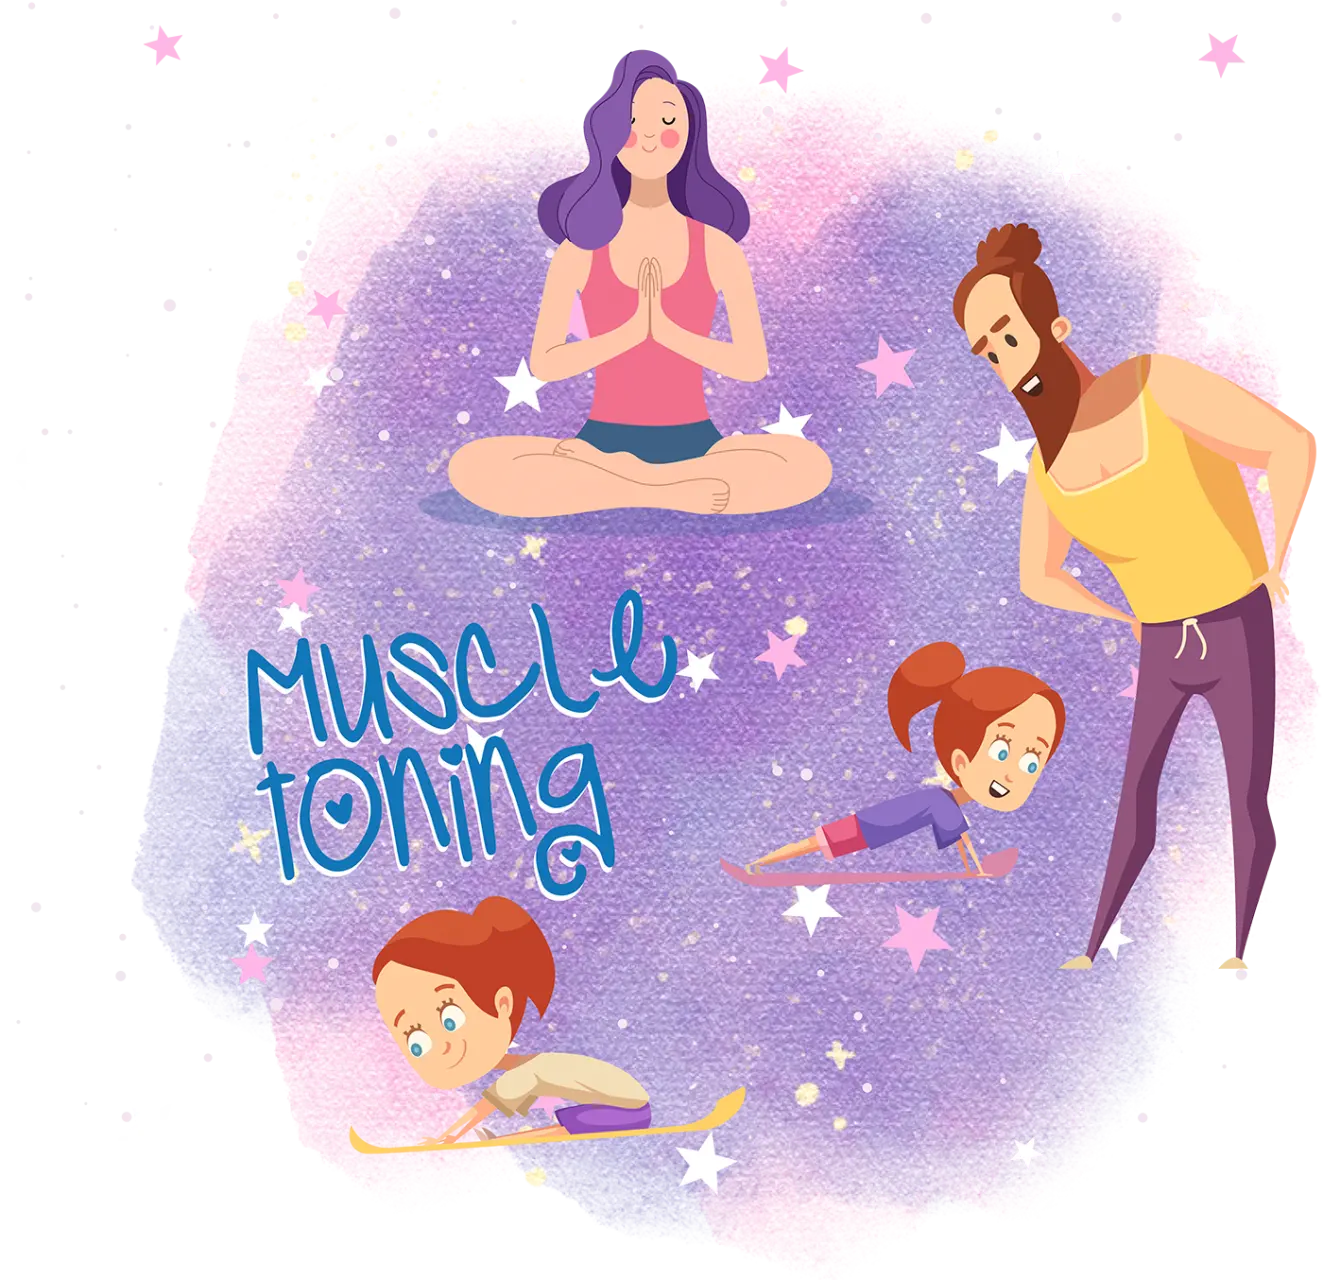 Muscle toning